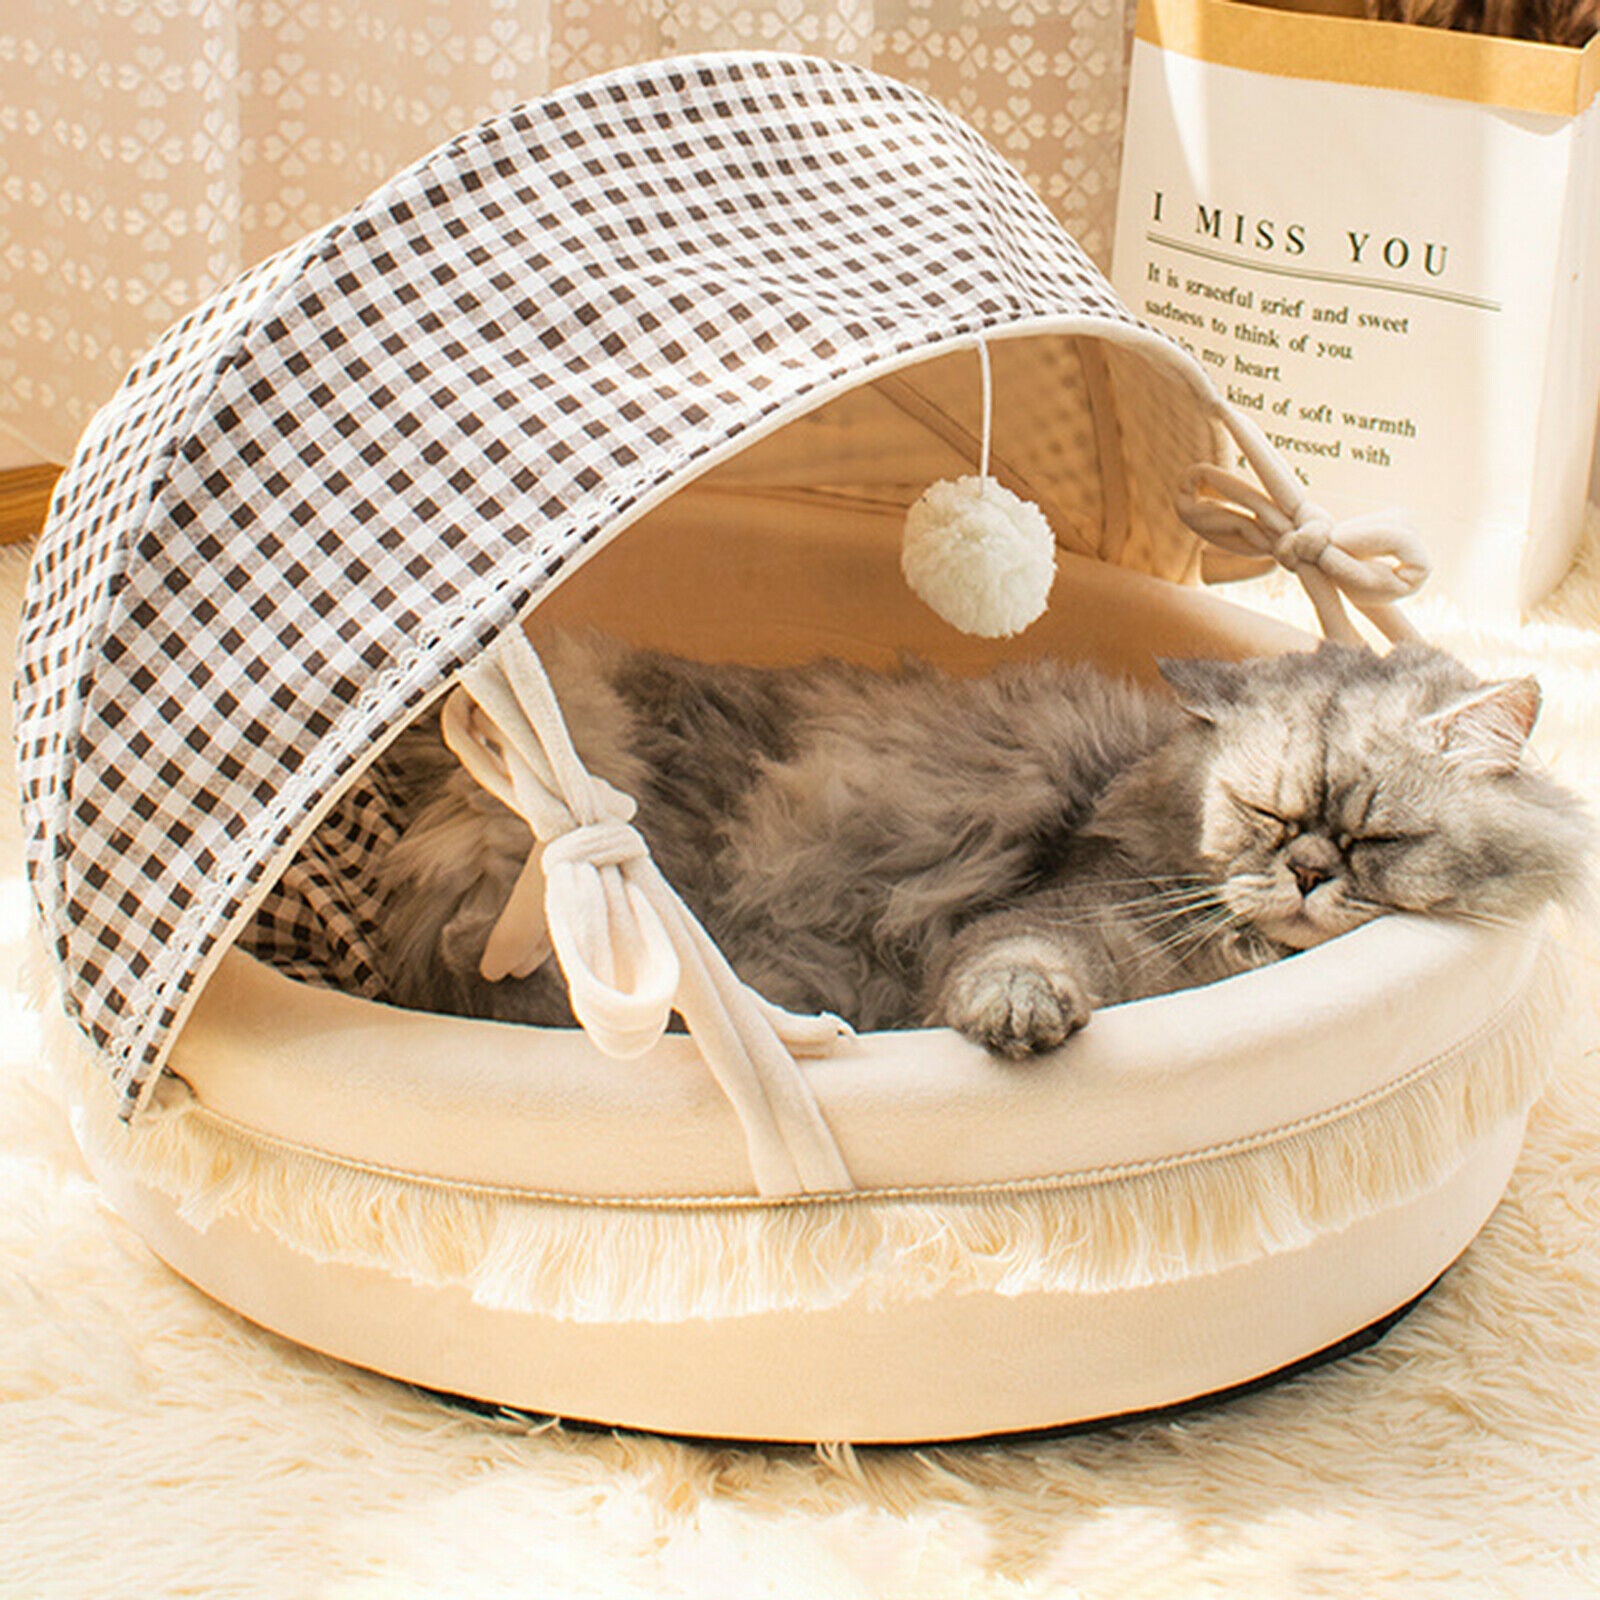 Pet Nest Bed Adjustable Warm Cave Nest Cute with Foldable Cover for Puppy